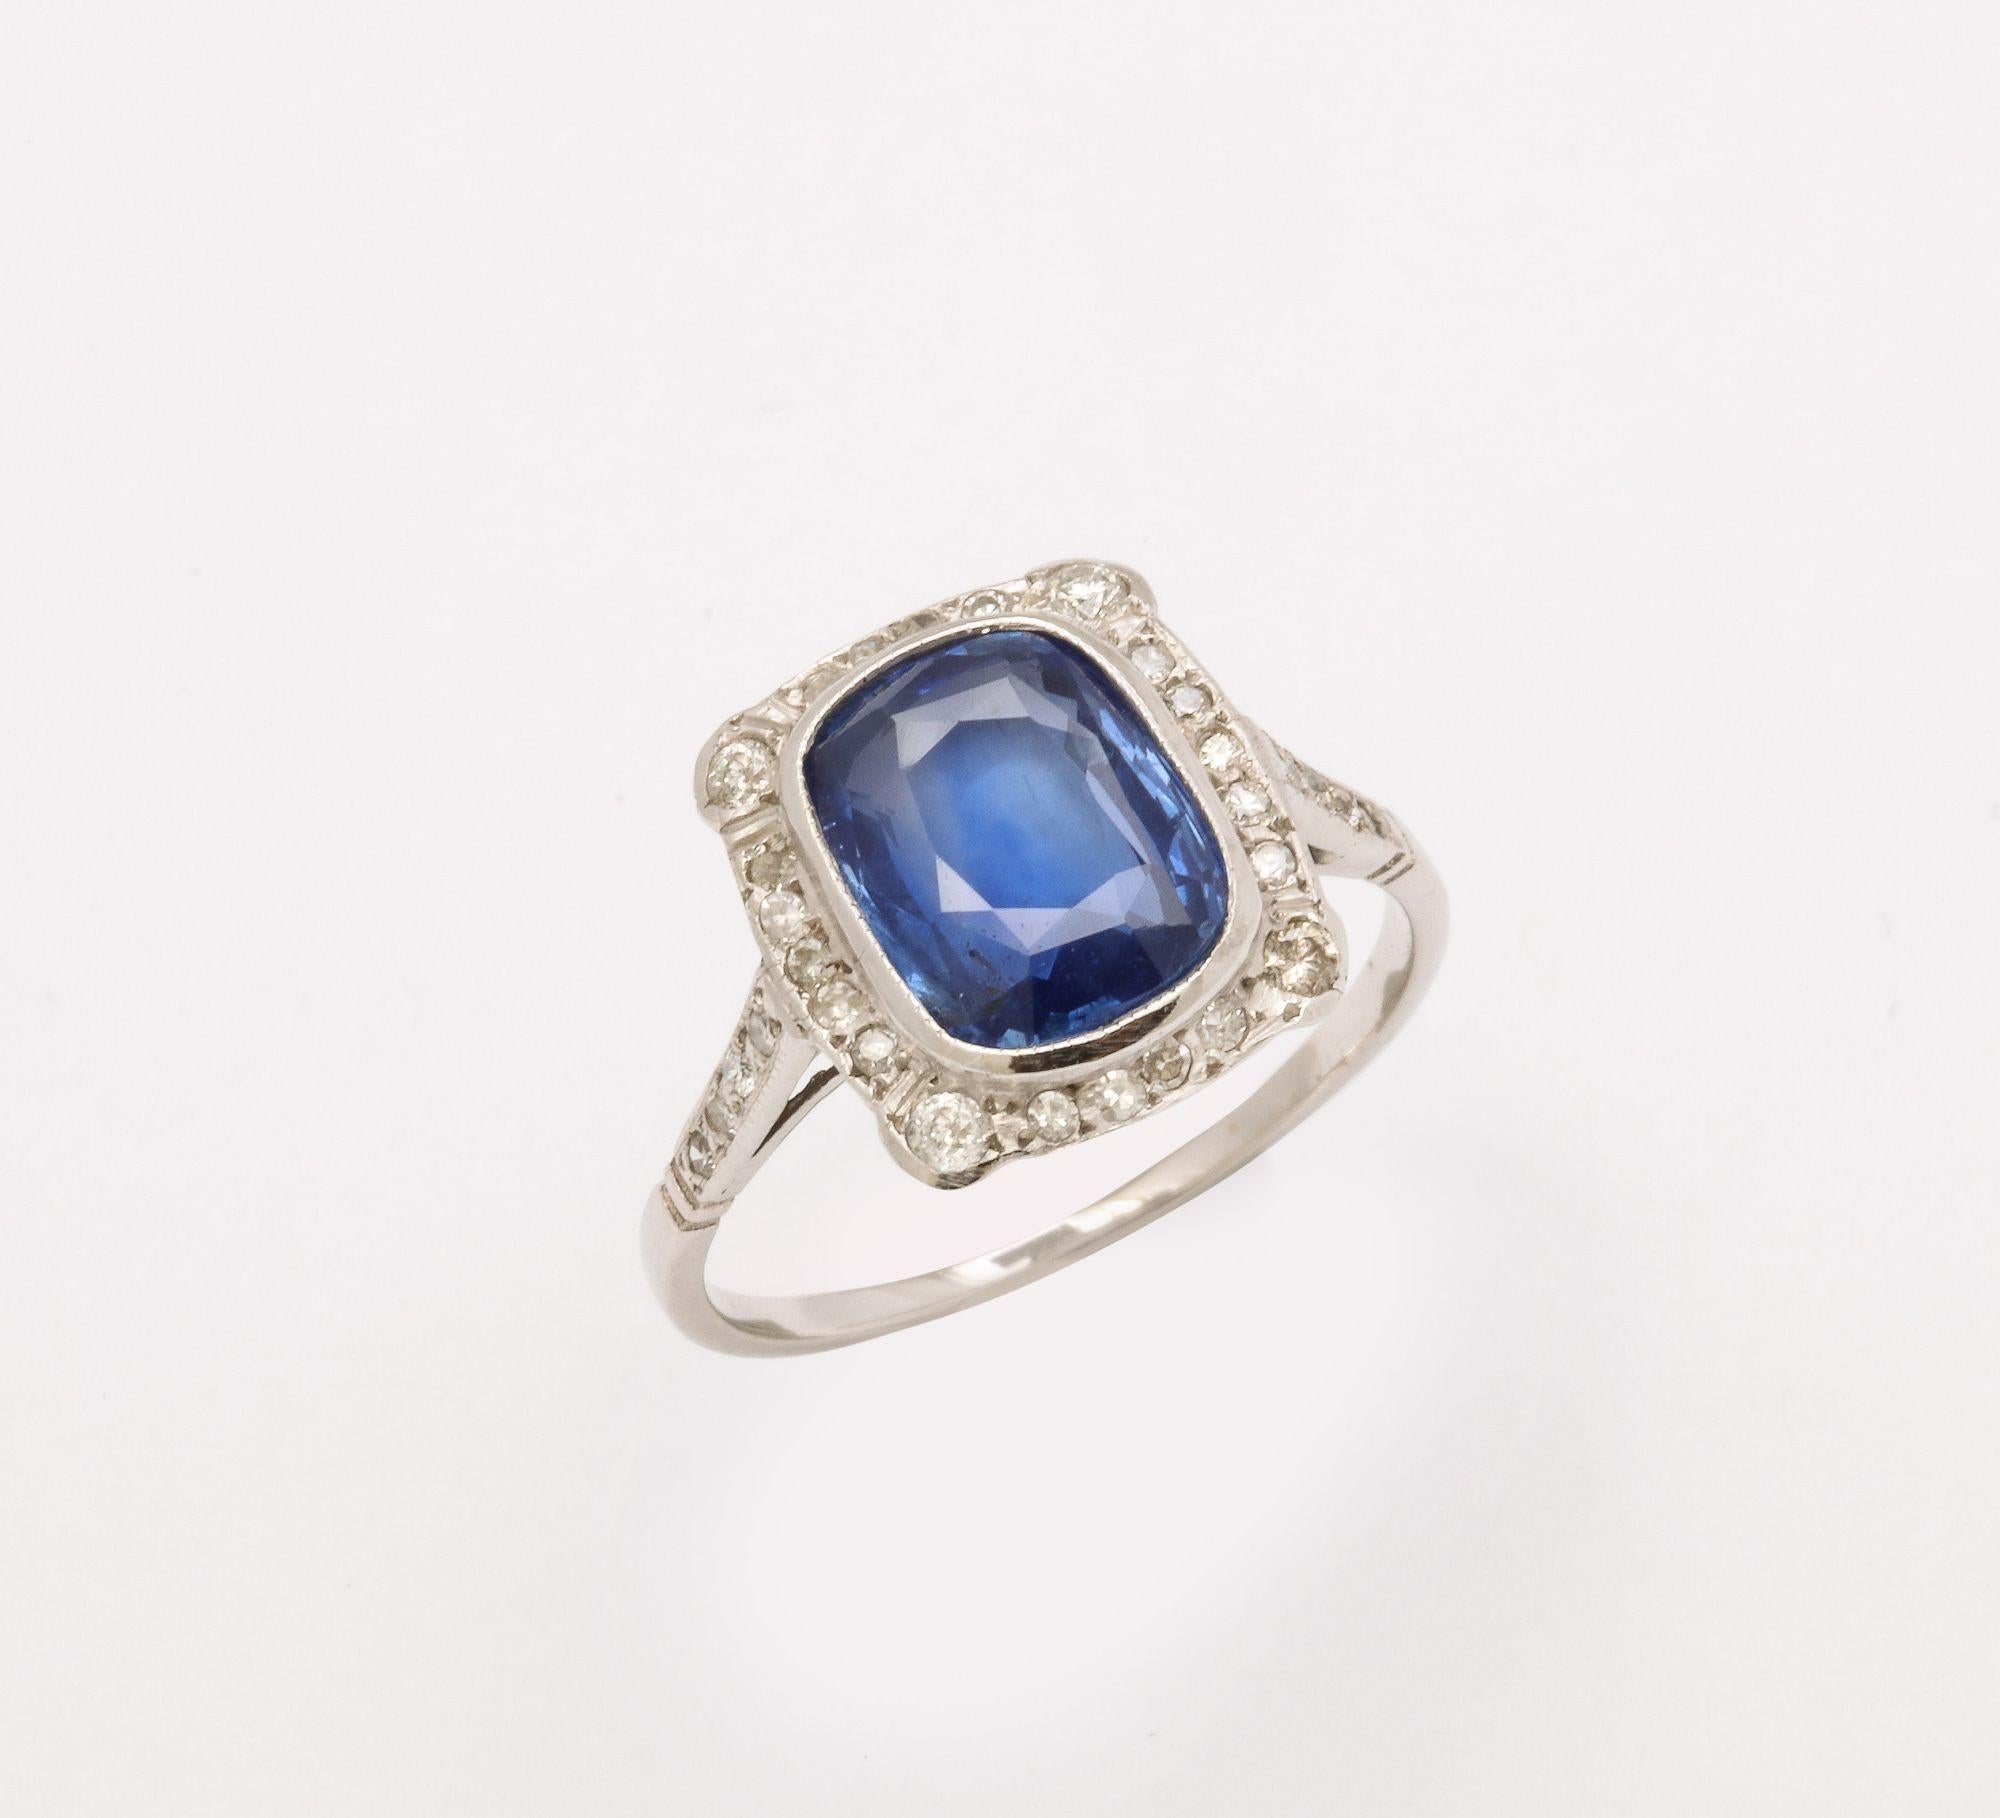 A beautiful delicate Art Deco Sapphire and Diamond white gold Ring. with a 2.50  ct cushion cut Natural sapphire surrounded by a halo of old mine cut diamonds.